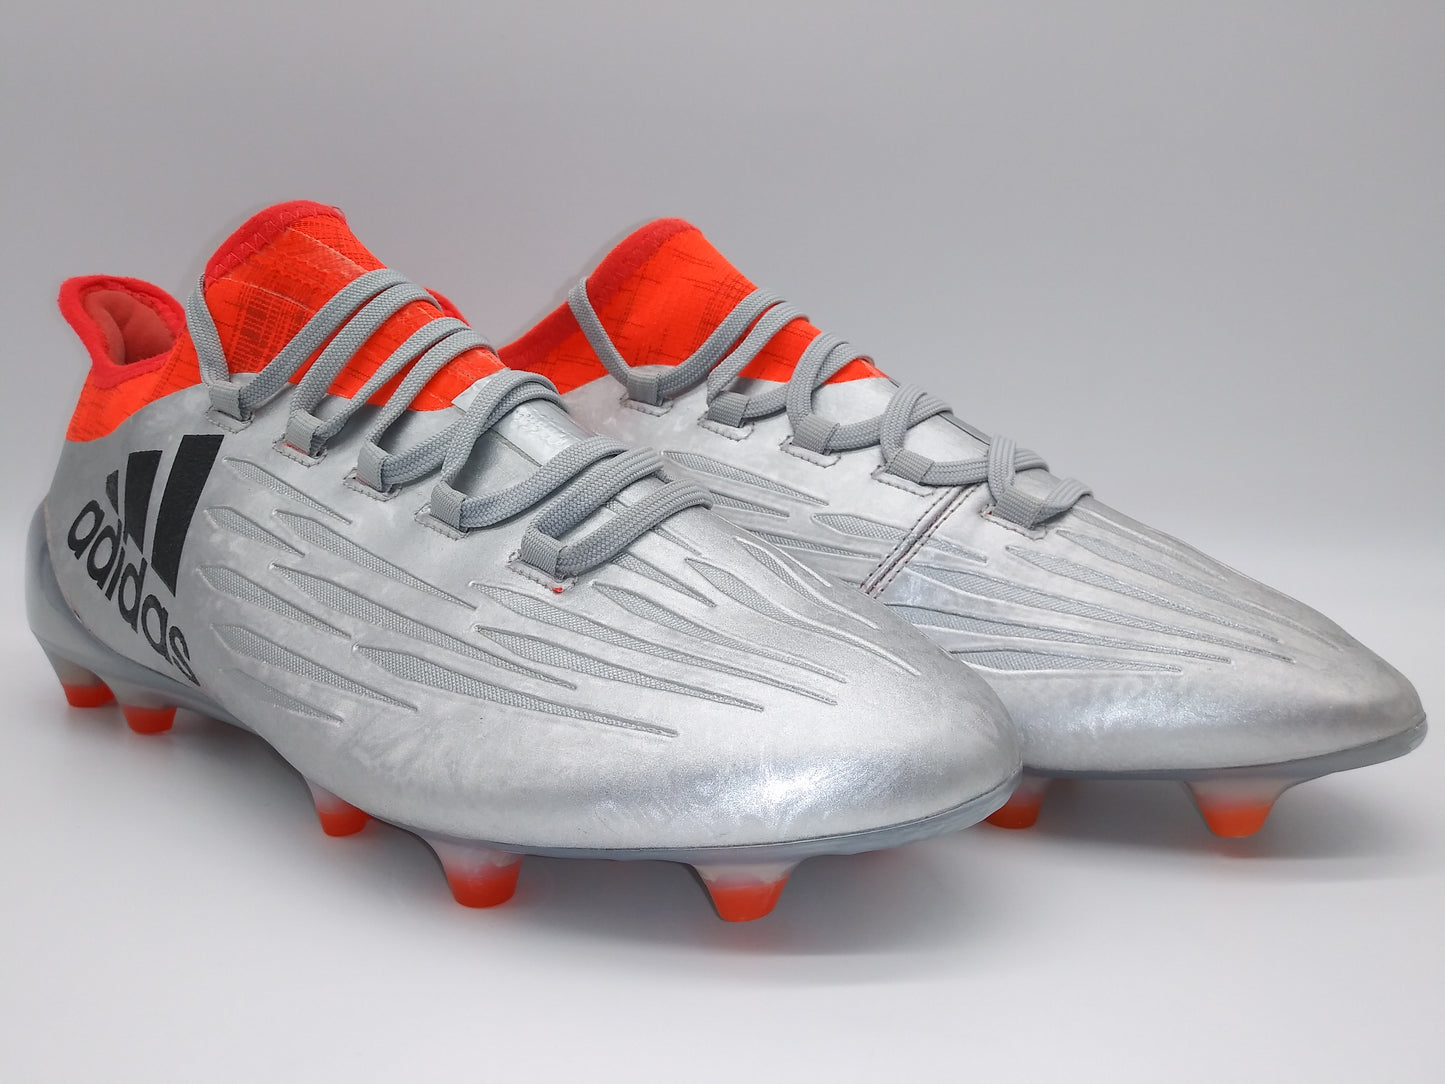 Adidas X 16.1 FG Cleats Silver and Orange Soccer Cleats